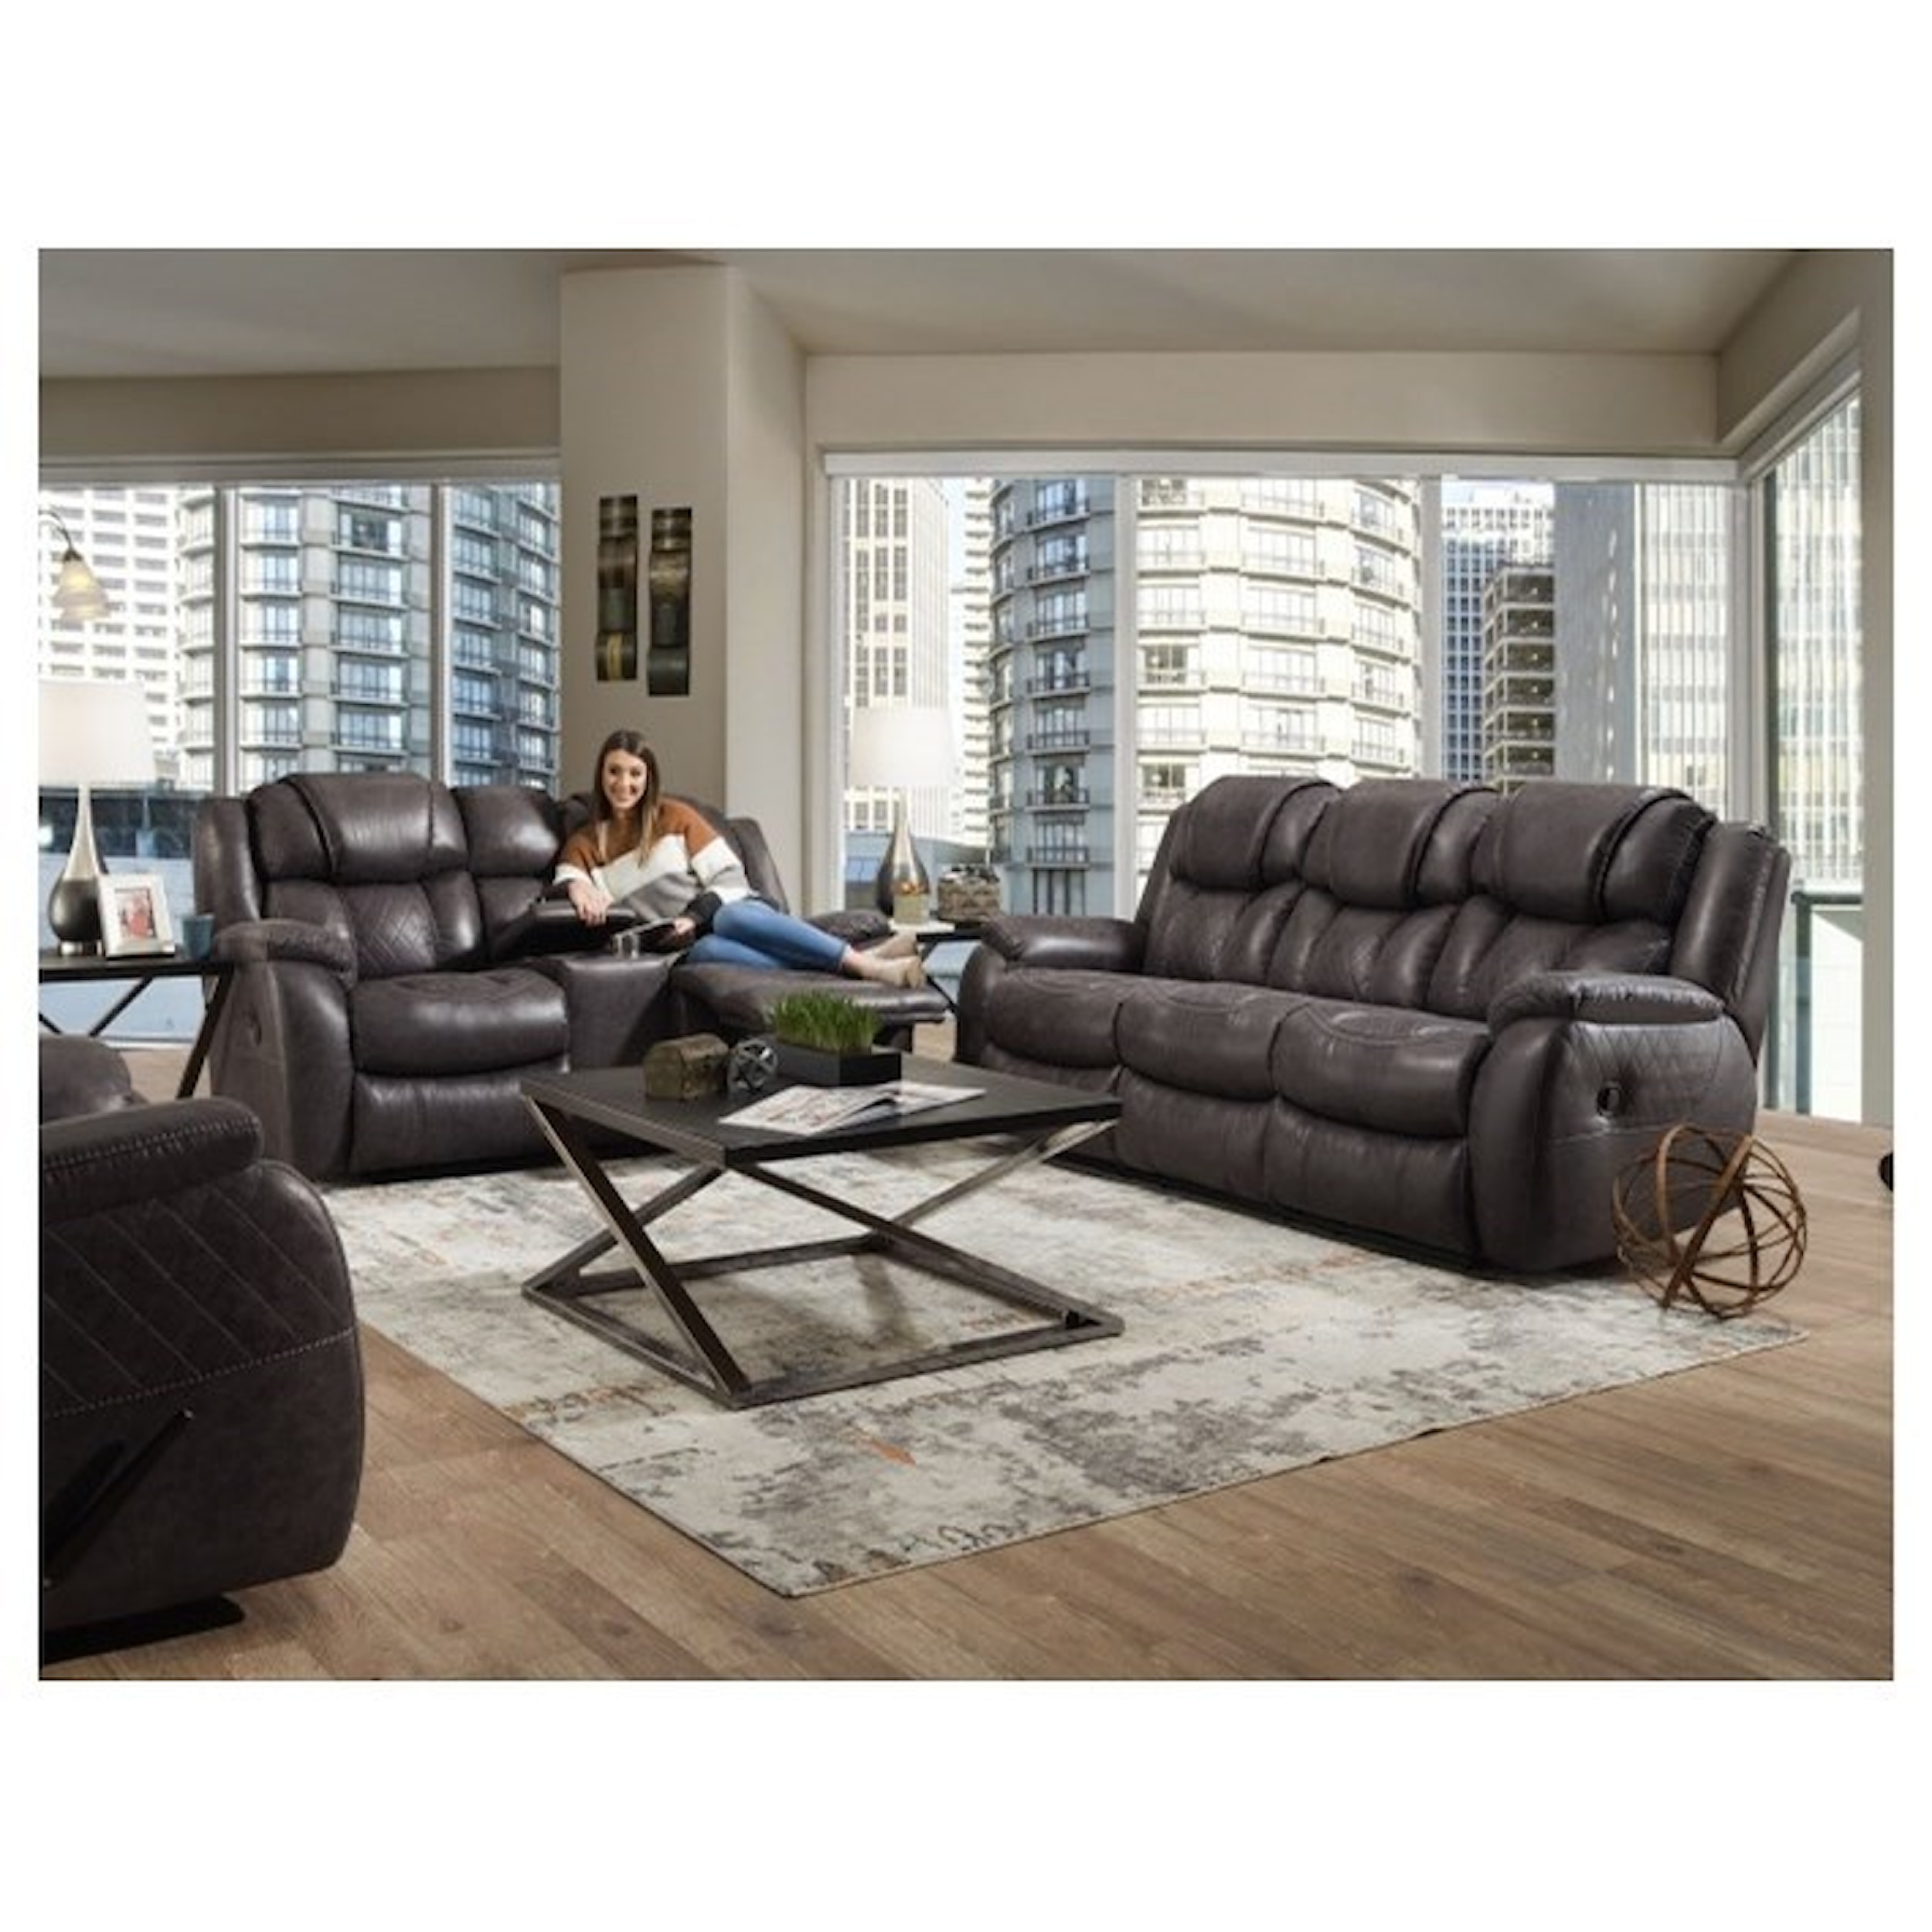 Homestretch Marlin 1184hs Casual Style Double Reclining Sofa Standard Furniture Reclining Sofa